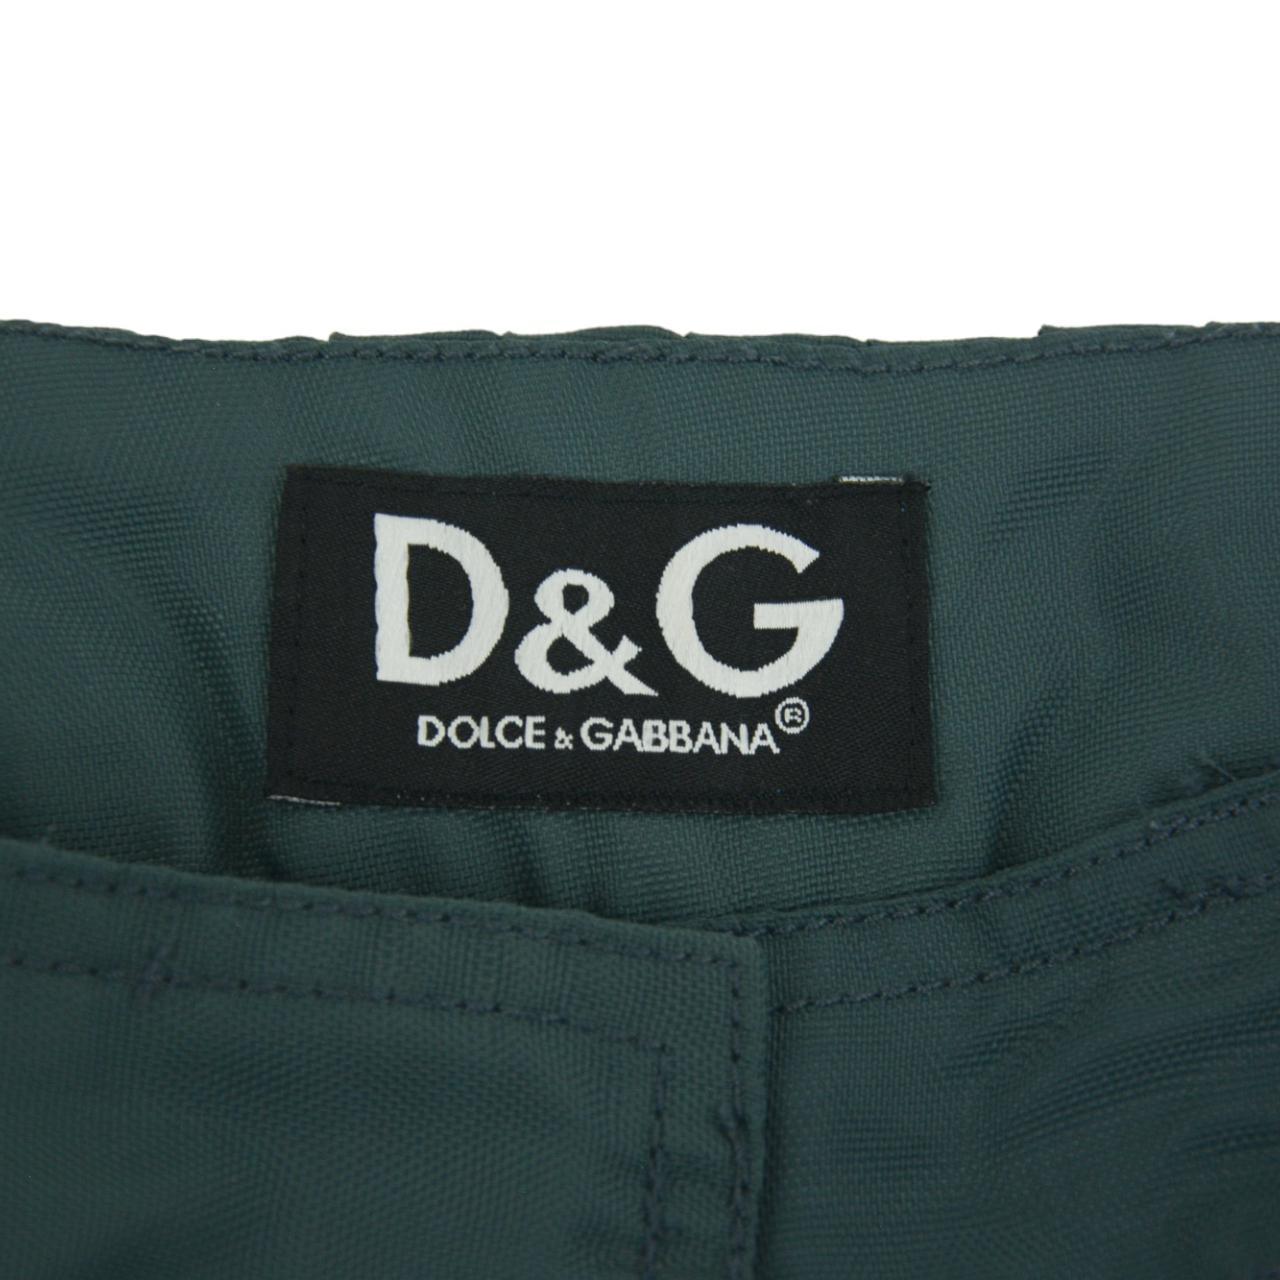 Vintage Archive Dolce and Gabbana Multi Pocket Trousers Womens Size W30 - Known Source